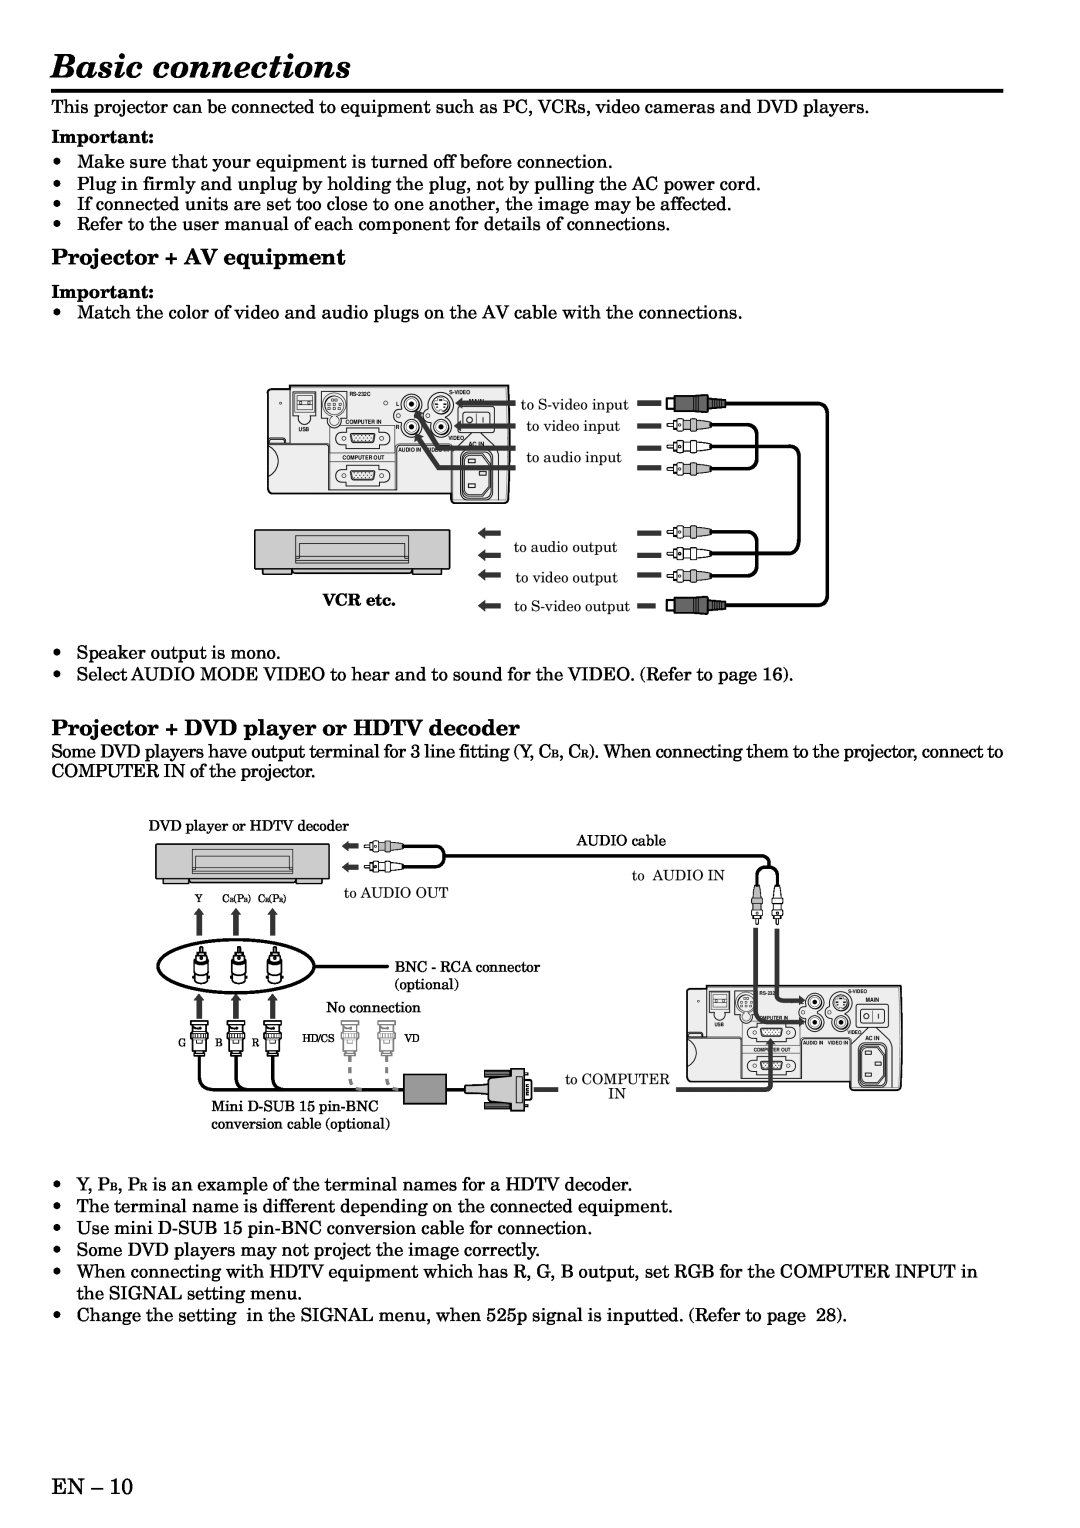 Mitsubishi Electronics XL1U user manual Basic connections, Projector + AV equipment, Projector + DVD player or HDTV decoder 